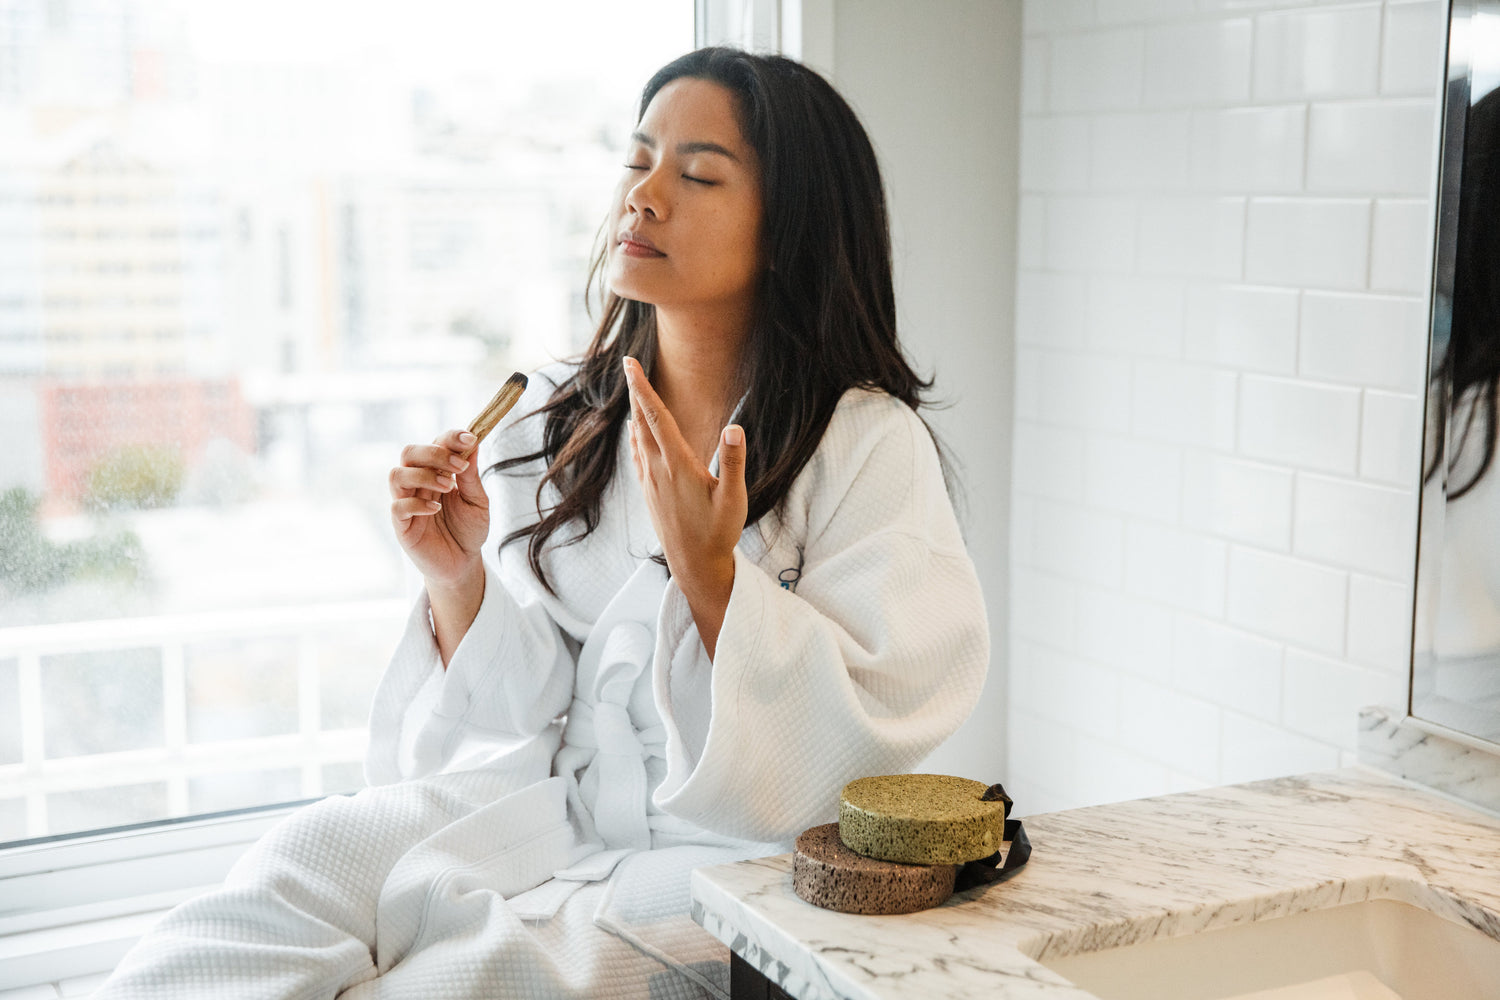 How to Pamper Yourself After a Long Day at Work